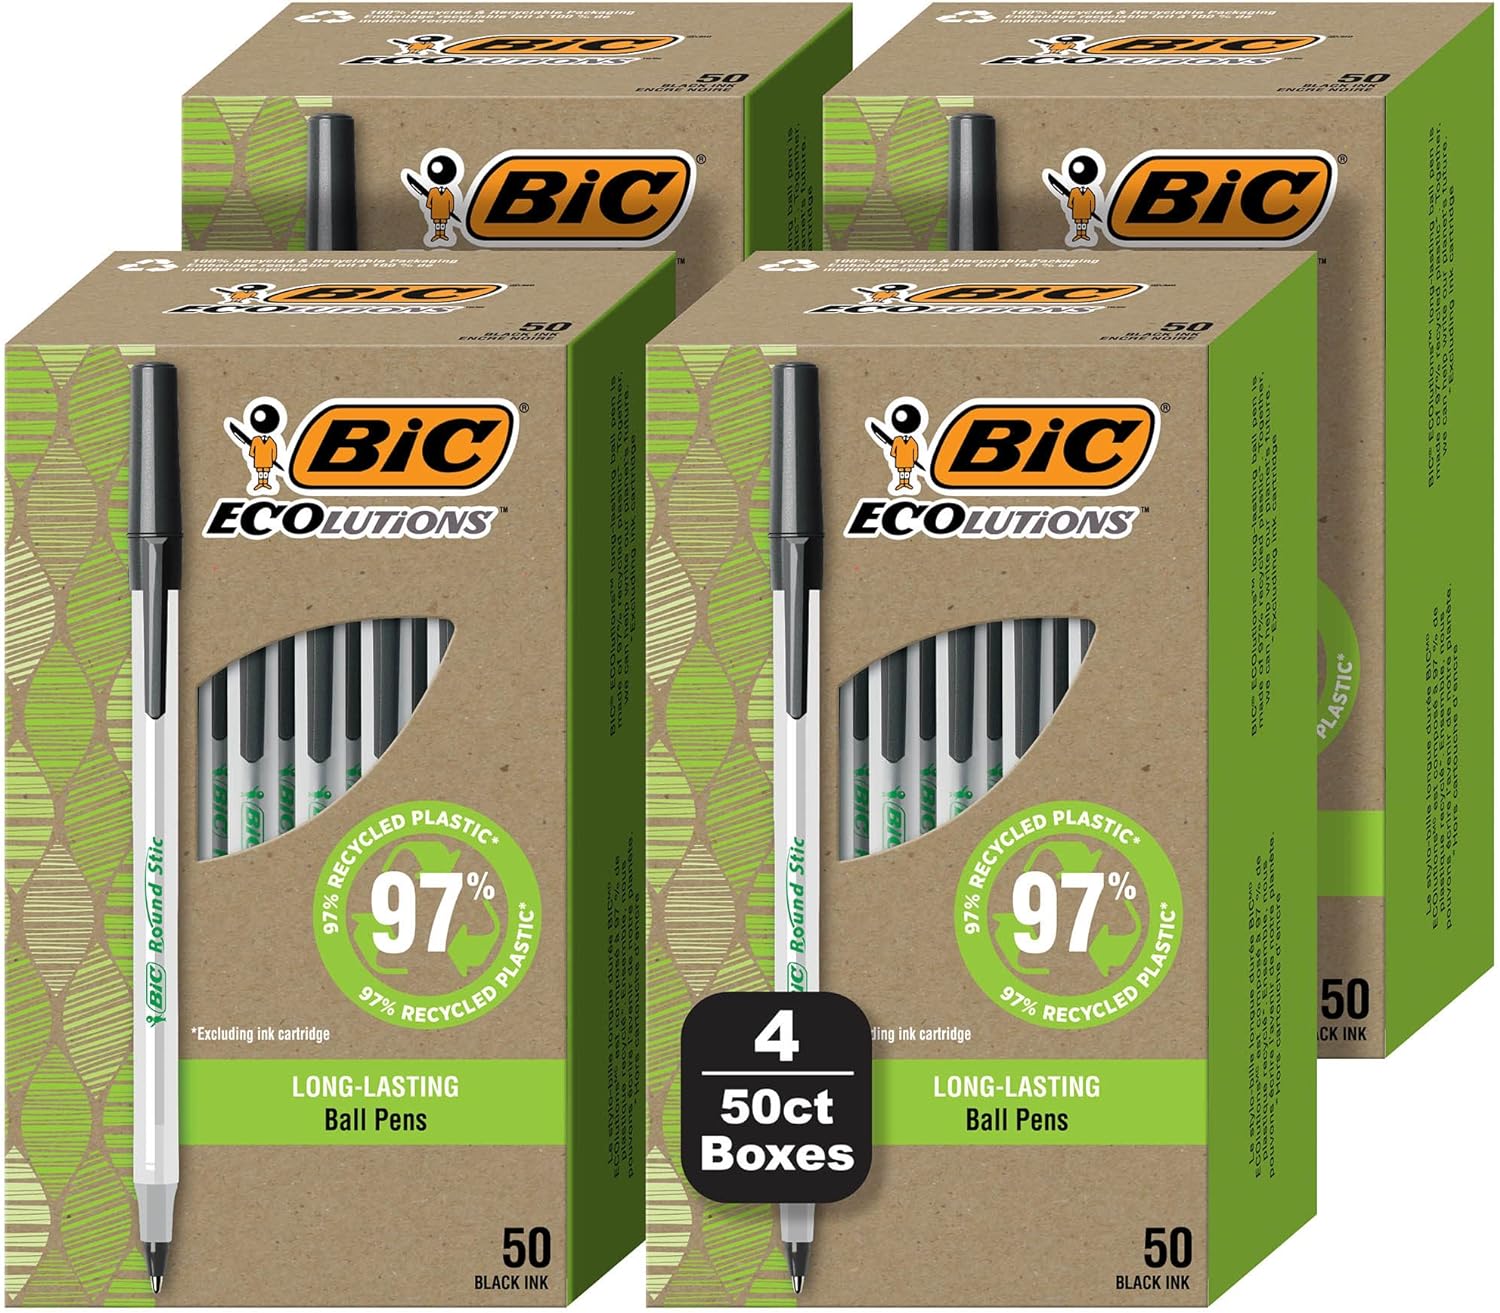 BIC Ecolutions Round Stic Ballpoint Pens, Medium Point (1.0mm), 200-Count Pack, Black Ink Pens Made from 97% Recycled Plastic